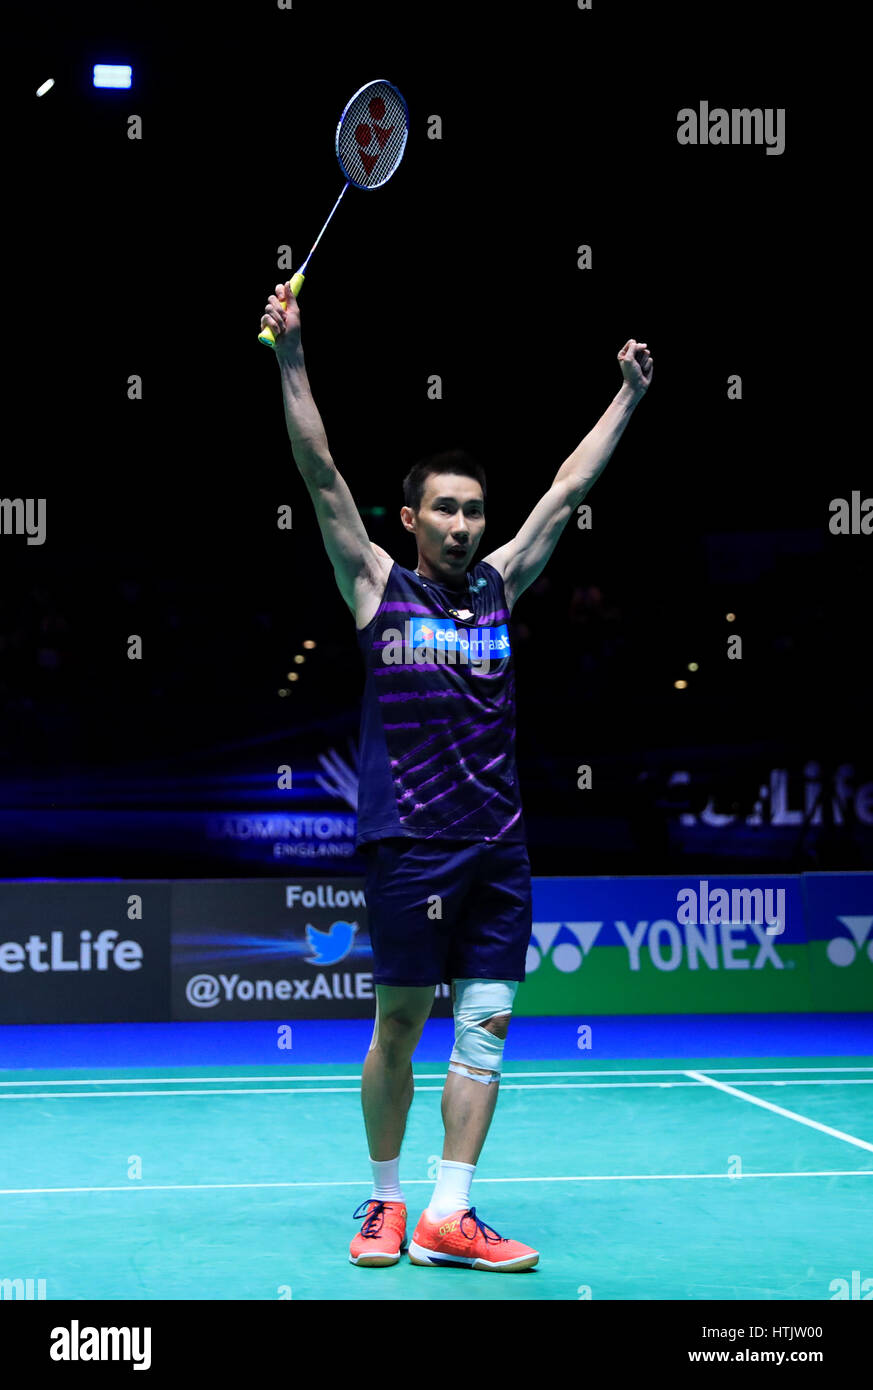 Malaysia's Chong Wei Lee celebrates victory over China's Yuqi Shi in the Men's Singles Final during day six of the YONEX All England Open Badminton Championships at the Barclaycard Arena, Birmingham. Stock Photo